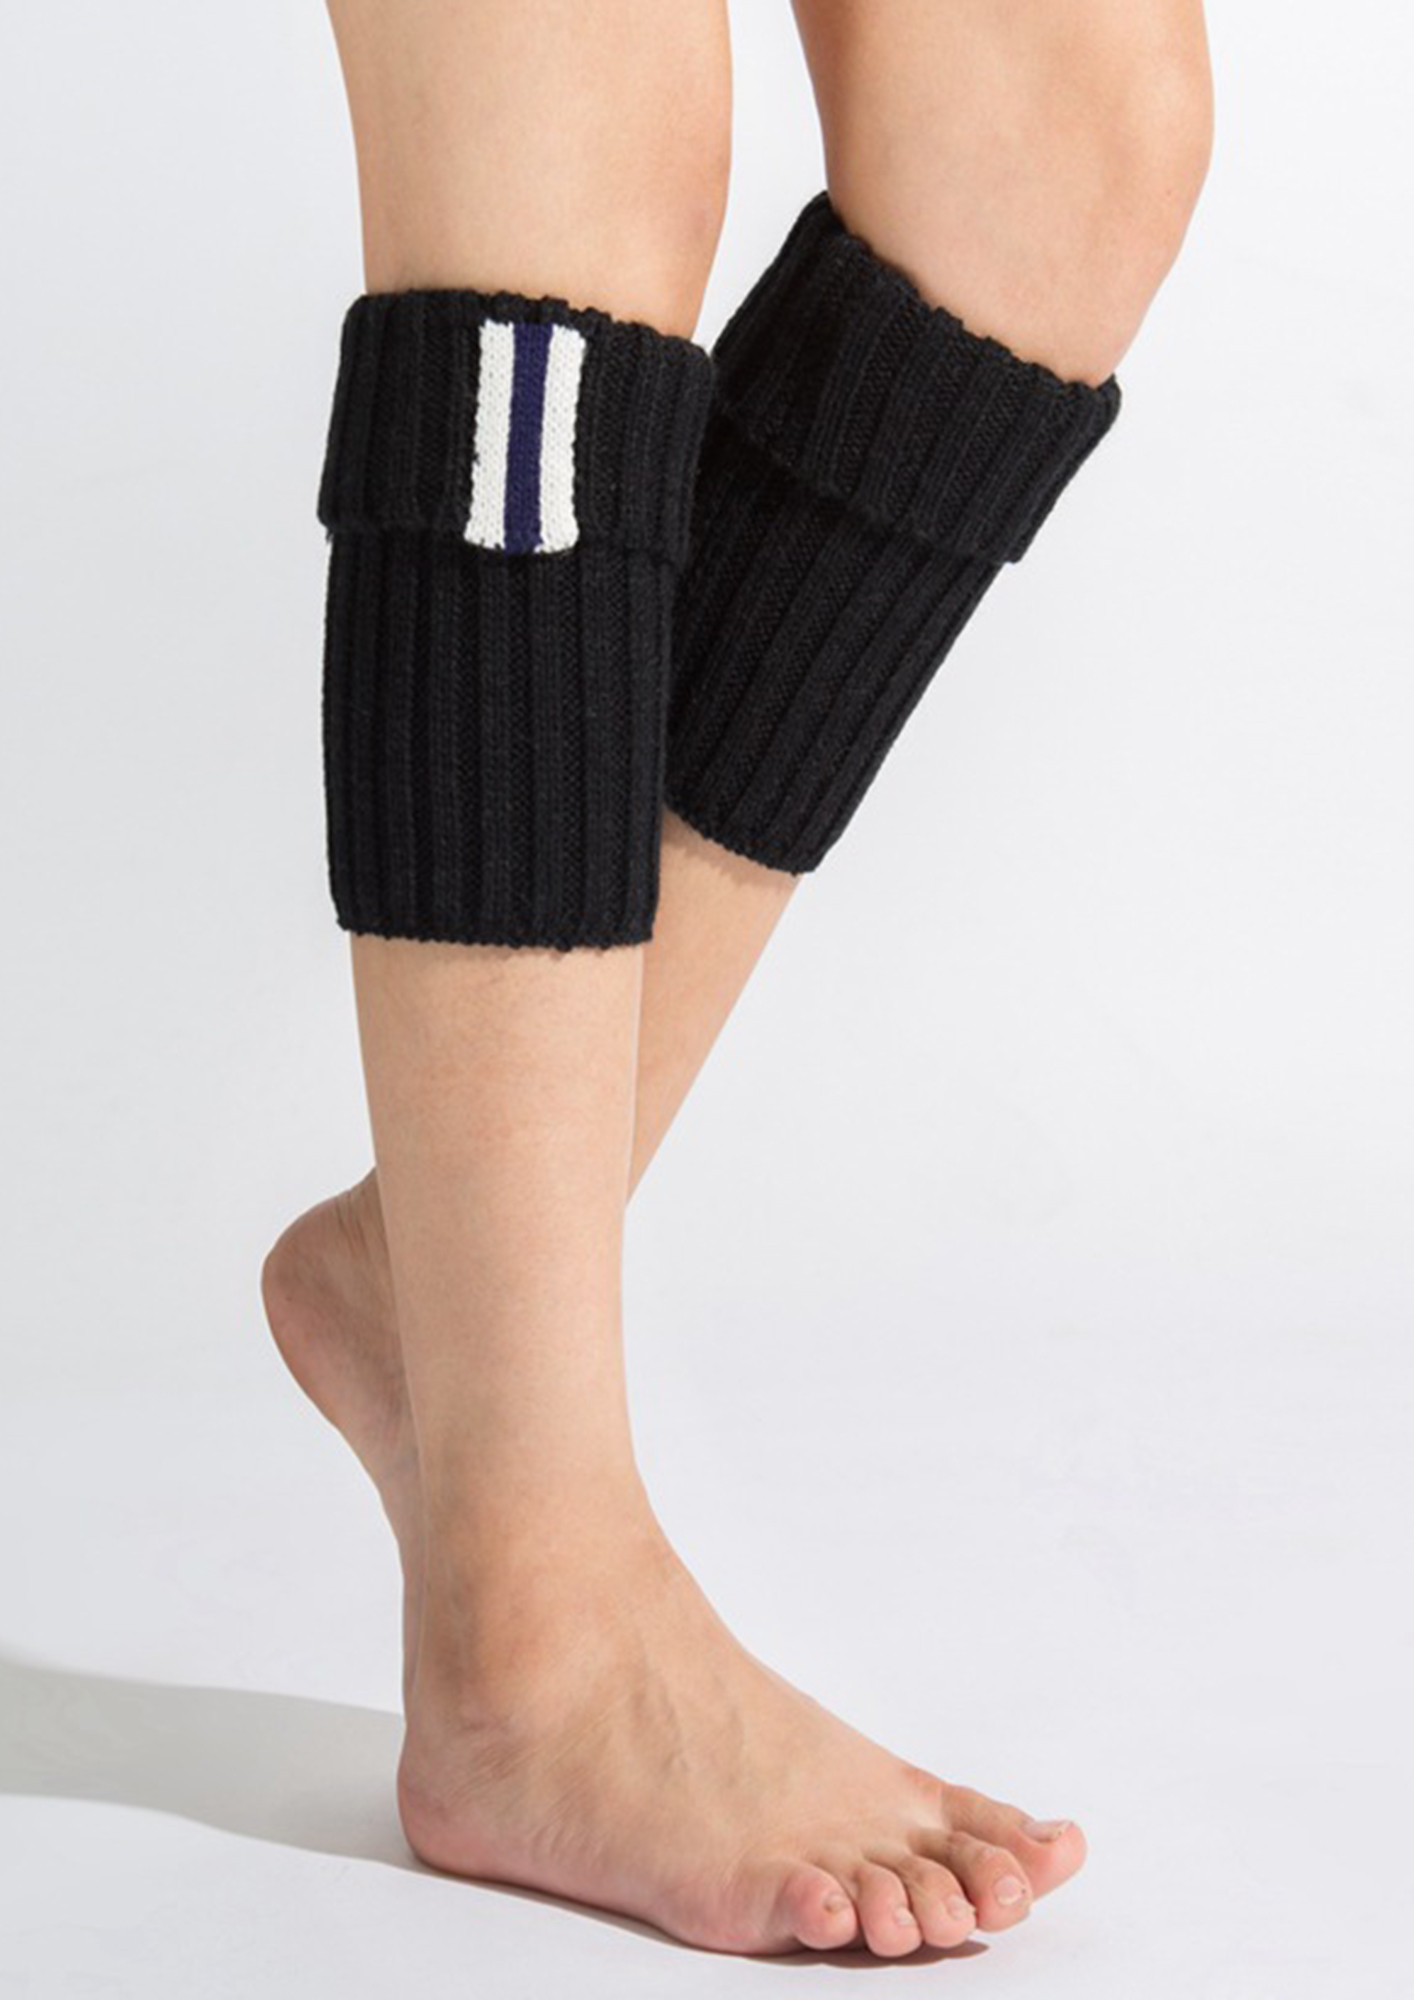 ALL RIBBED SHORT ACRYLIC BLACK BOOT CUFFS